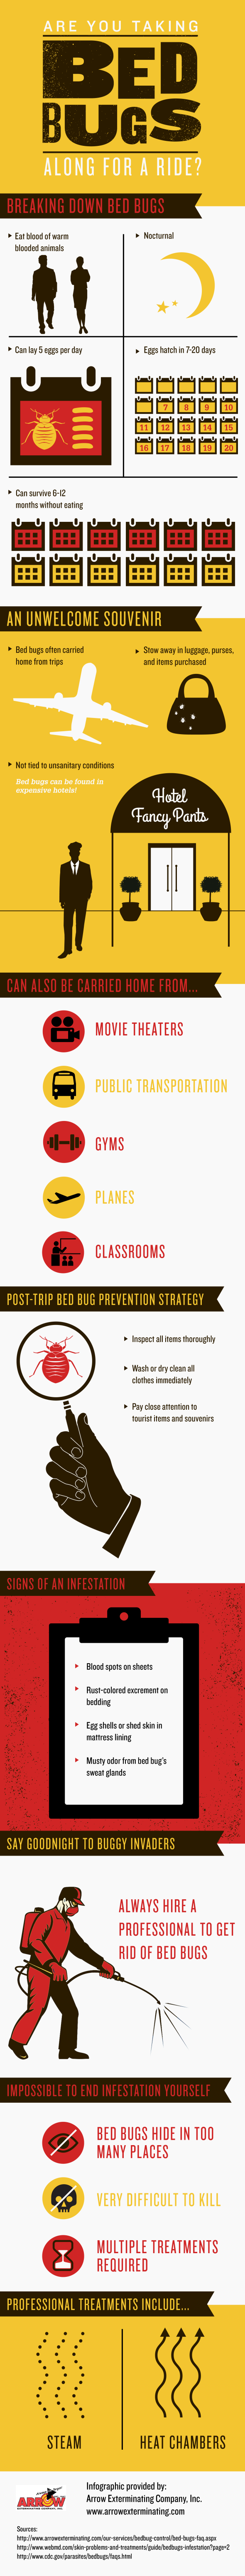 Are-You-Taking-Bed-Bugs-Along-for-a-Ride-Infographic